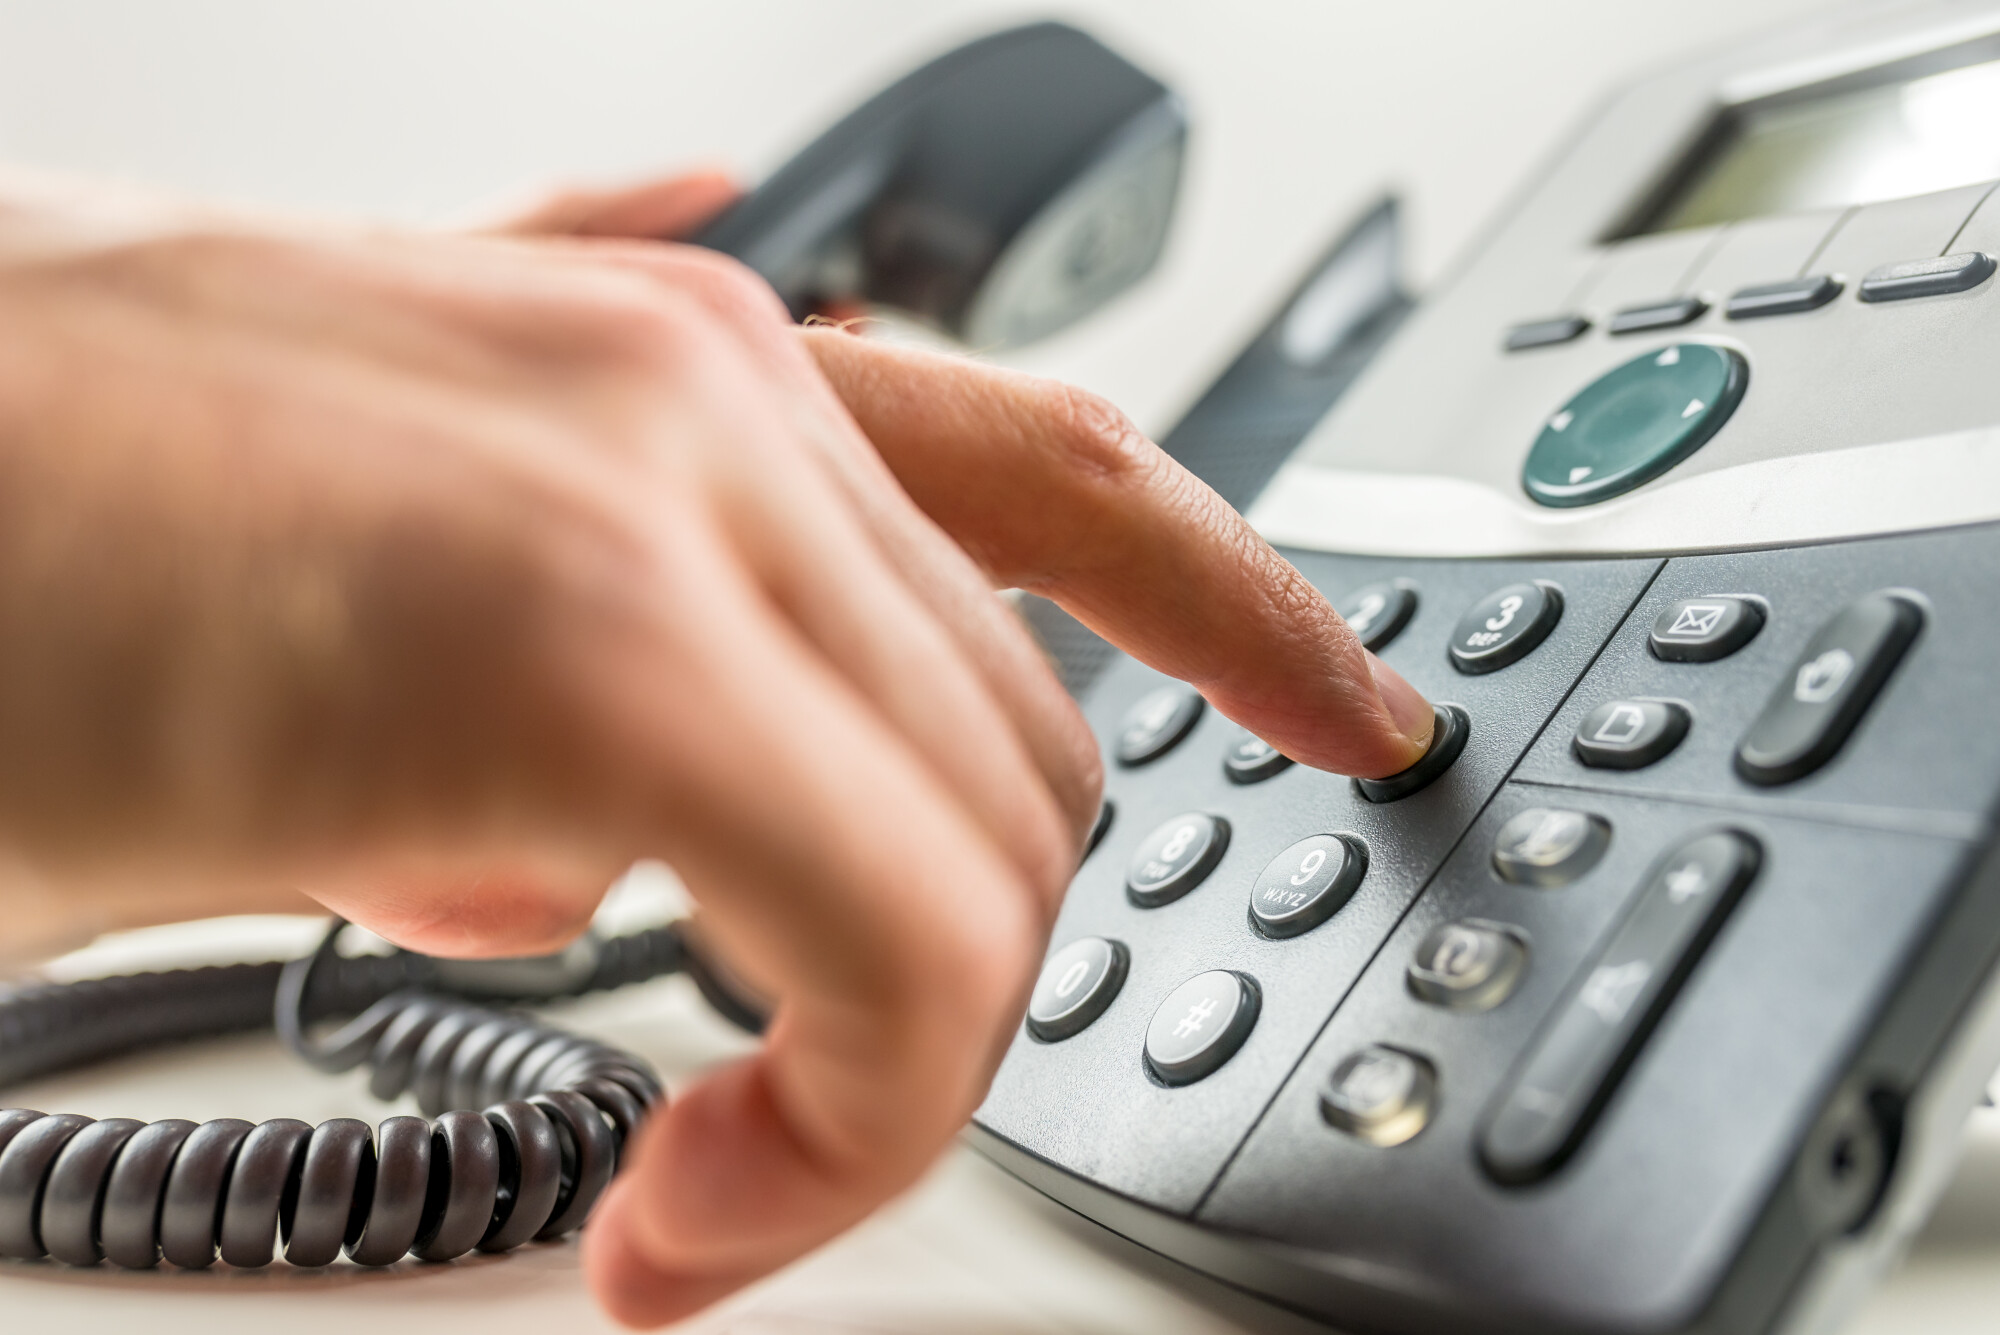 Best Auto Dialer Software: 4 Programs You’ve Got to Try